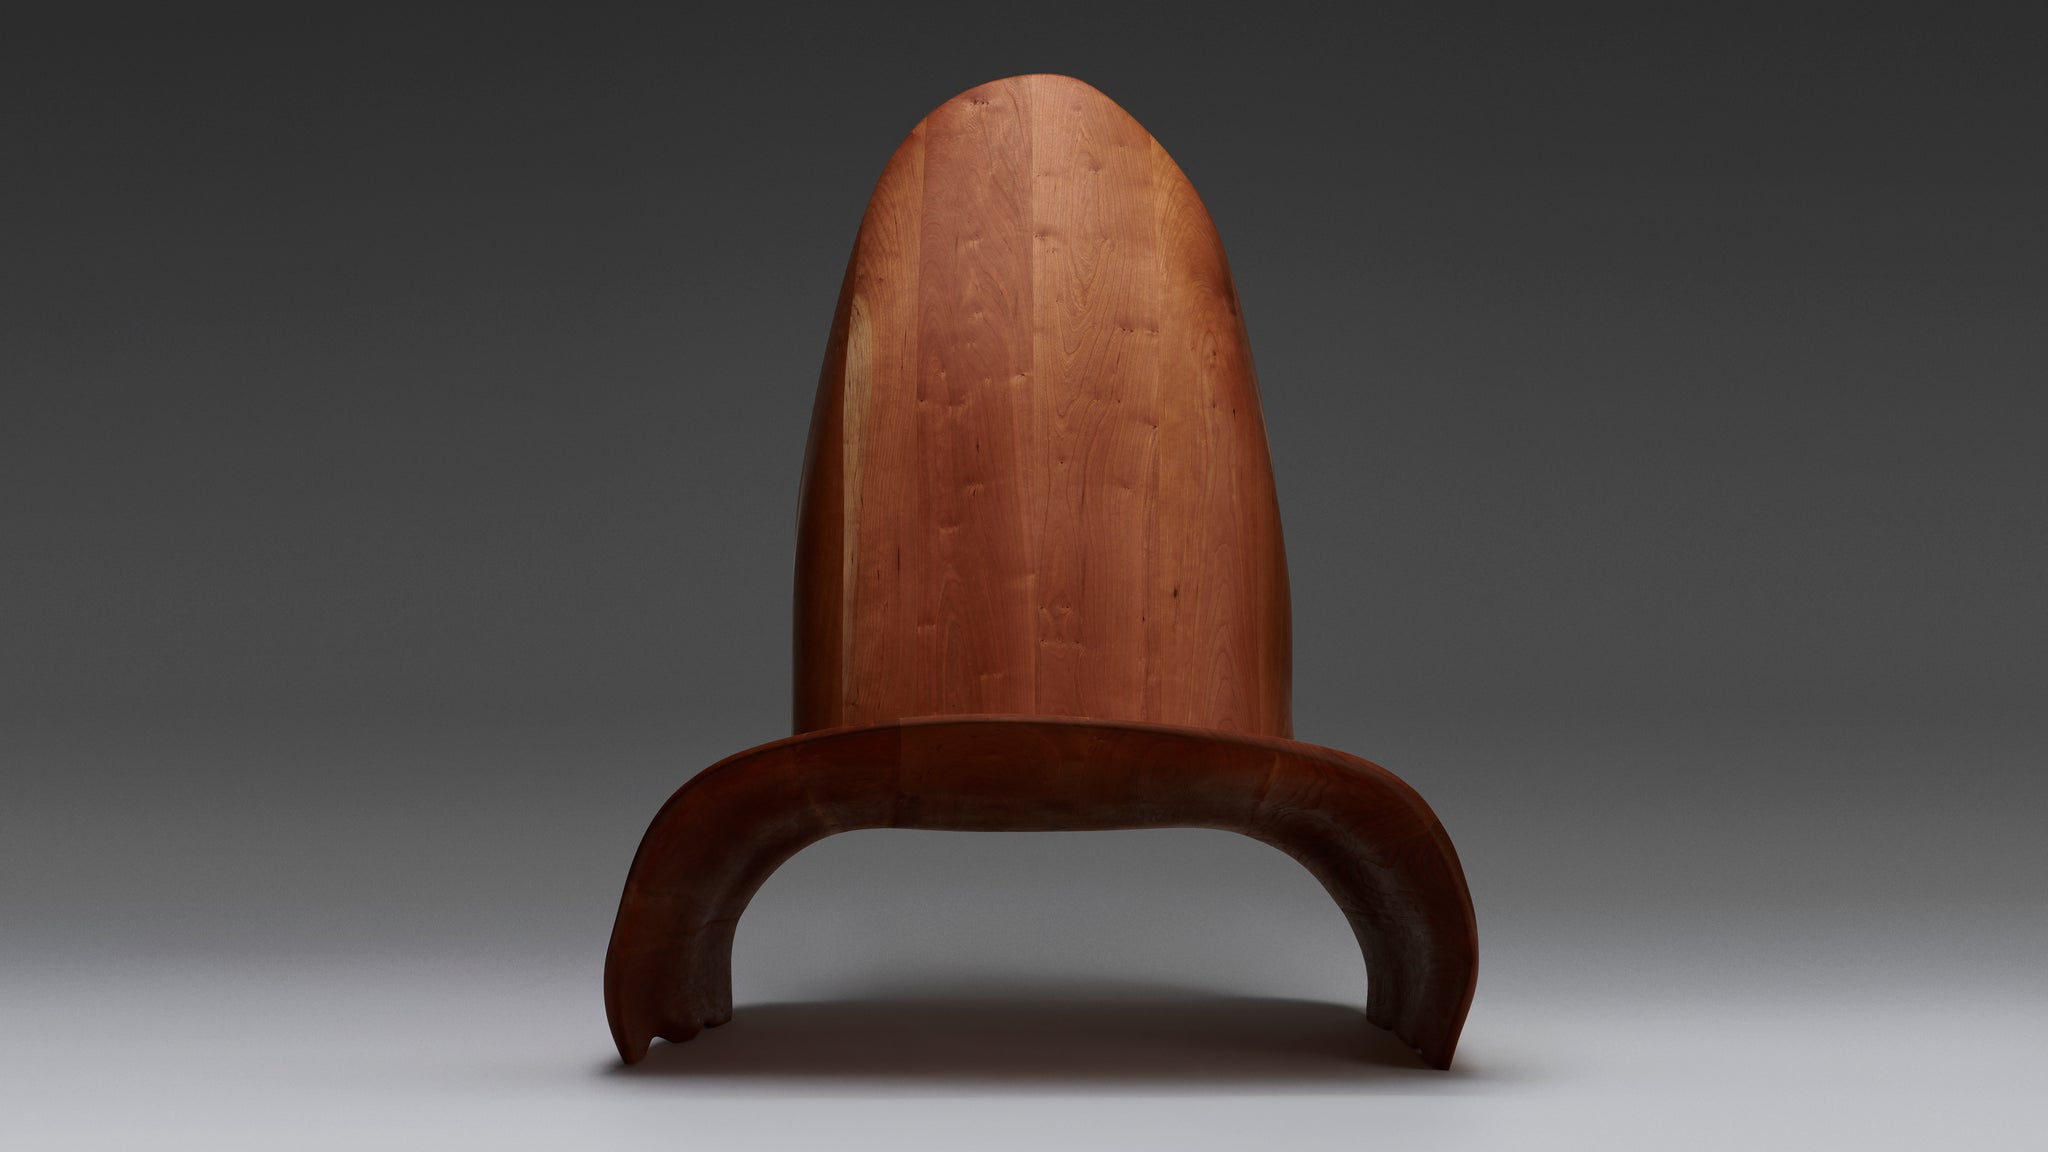 Mast Furniture project shield chair